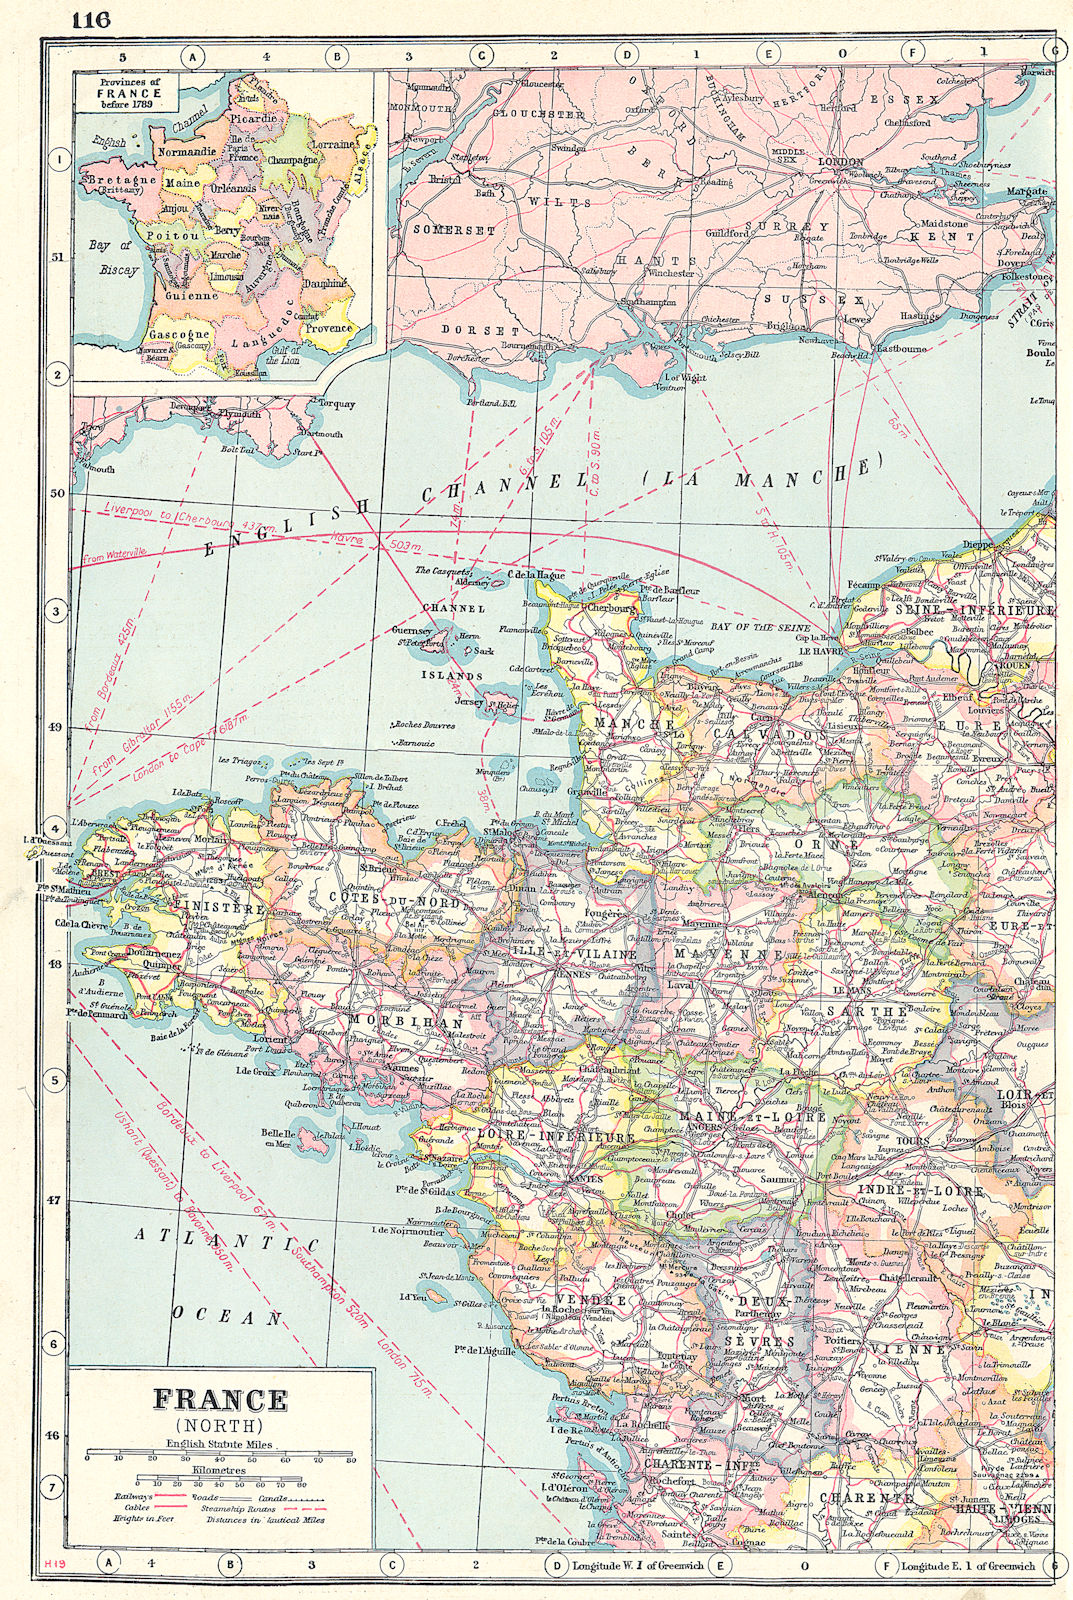 FRANCE NORTH WEST. showing departements. Inset <1789 Provinces 1920 old map